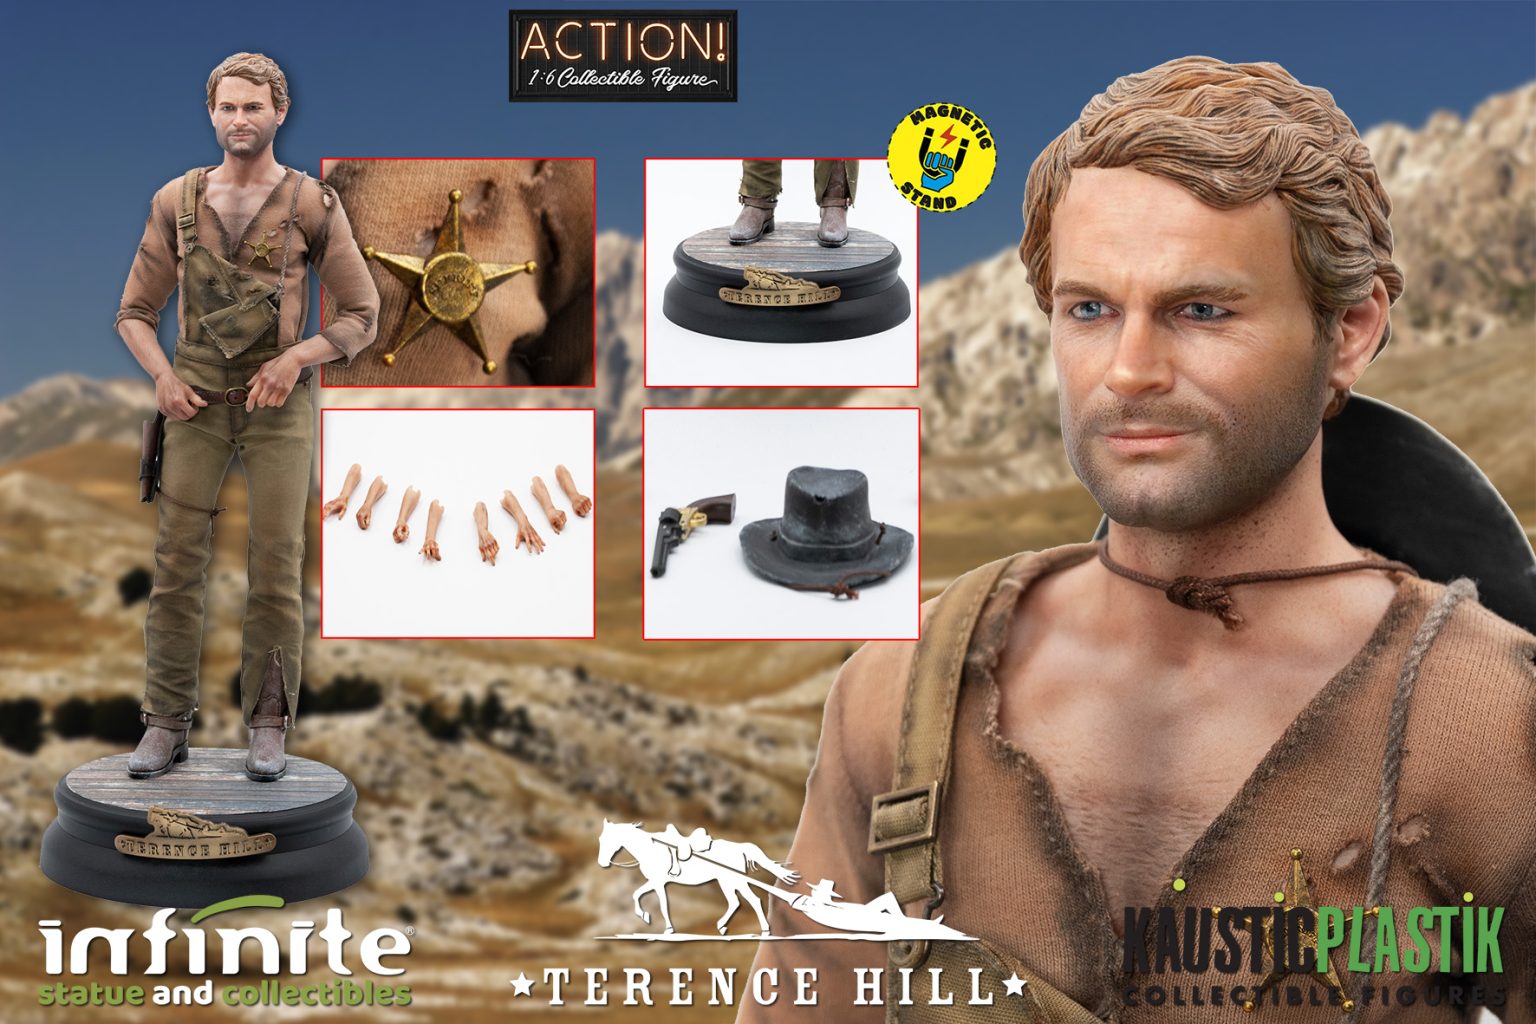 NEW PRODUCT: INFINITE STATUE & KAUSTIC PLASTIK TERENCE HILL 1/6 ACTION - REGULAR, DELUXE, EXCLUSIVE, DIORAMA Terence-STD-8-COMPLETE-1536x1024